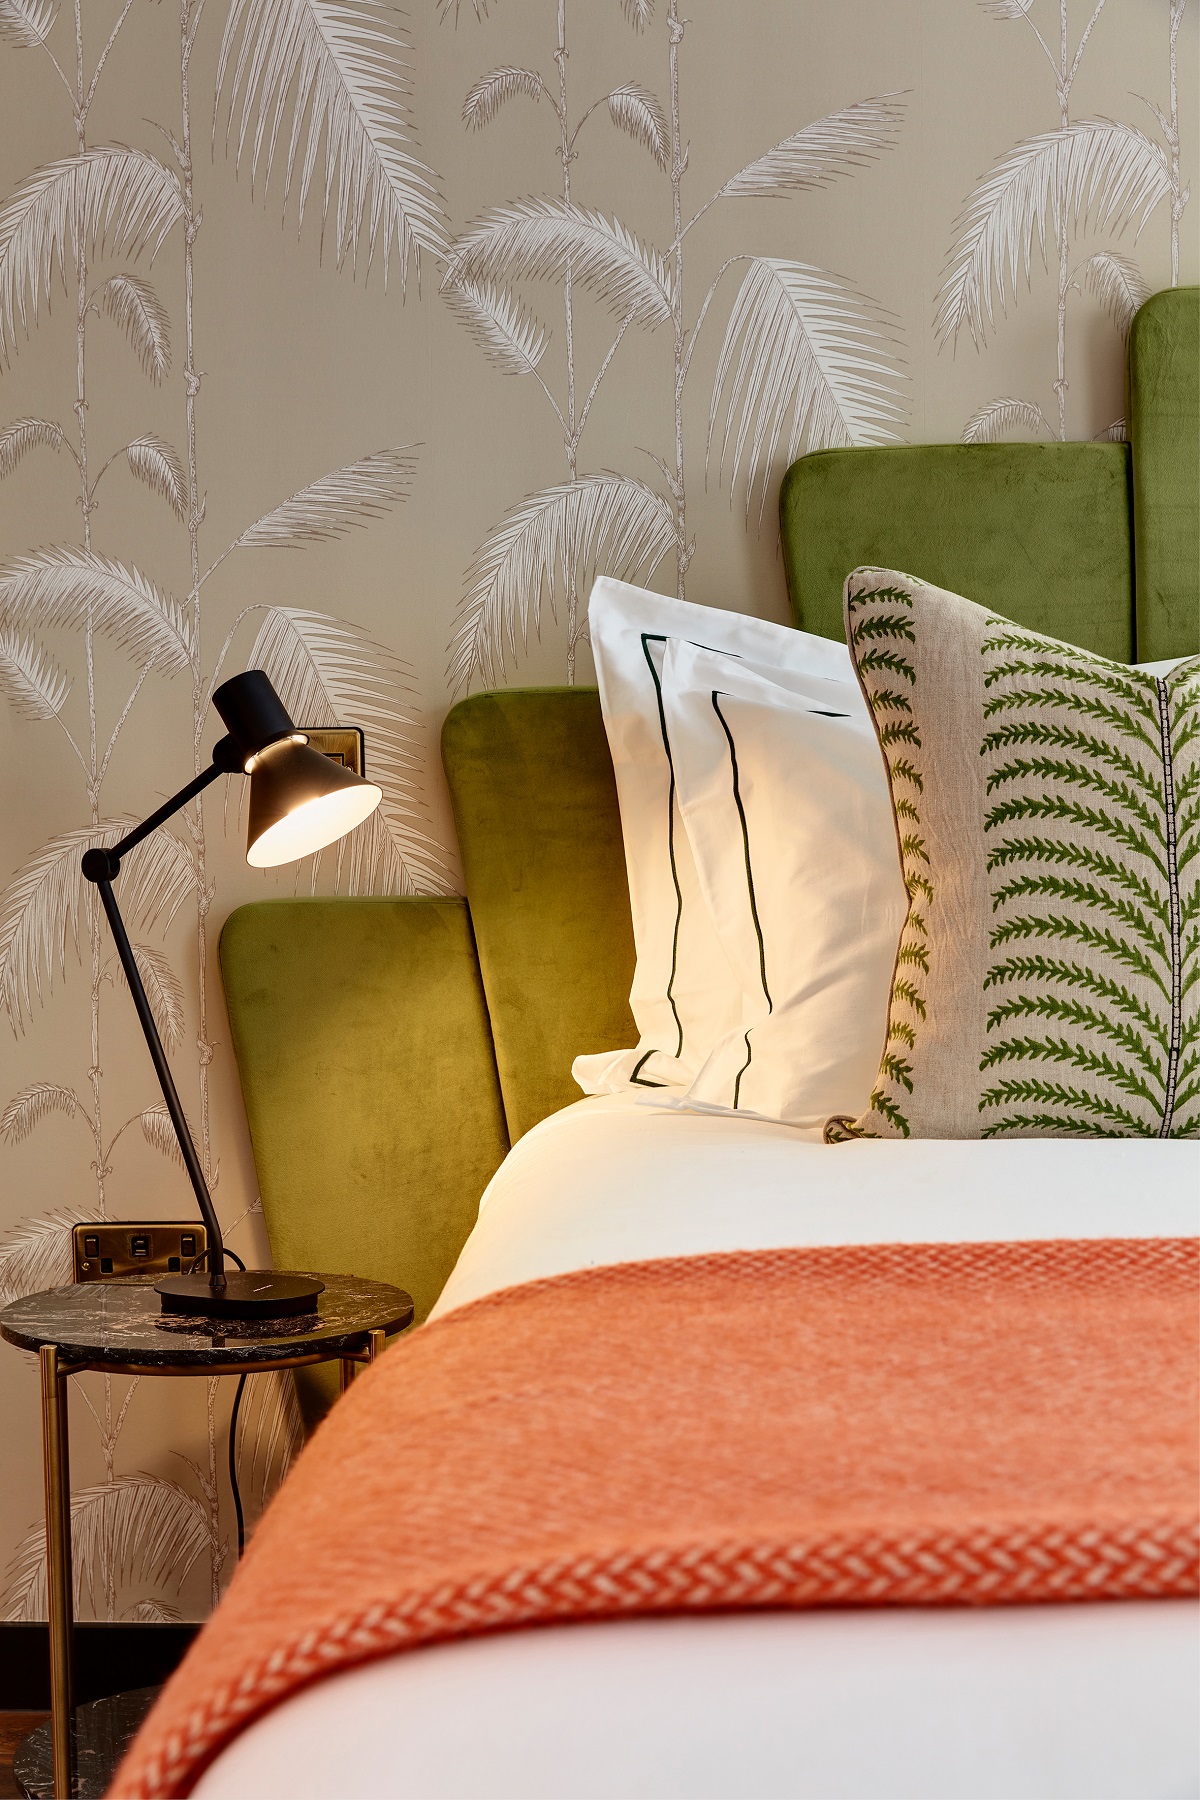 detail of green art deco shaped headboard, oatterend pillow and orange woven throw in guestroom at Brama